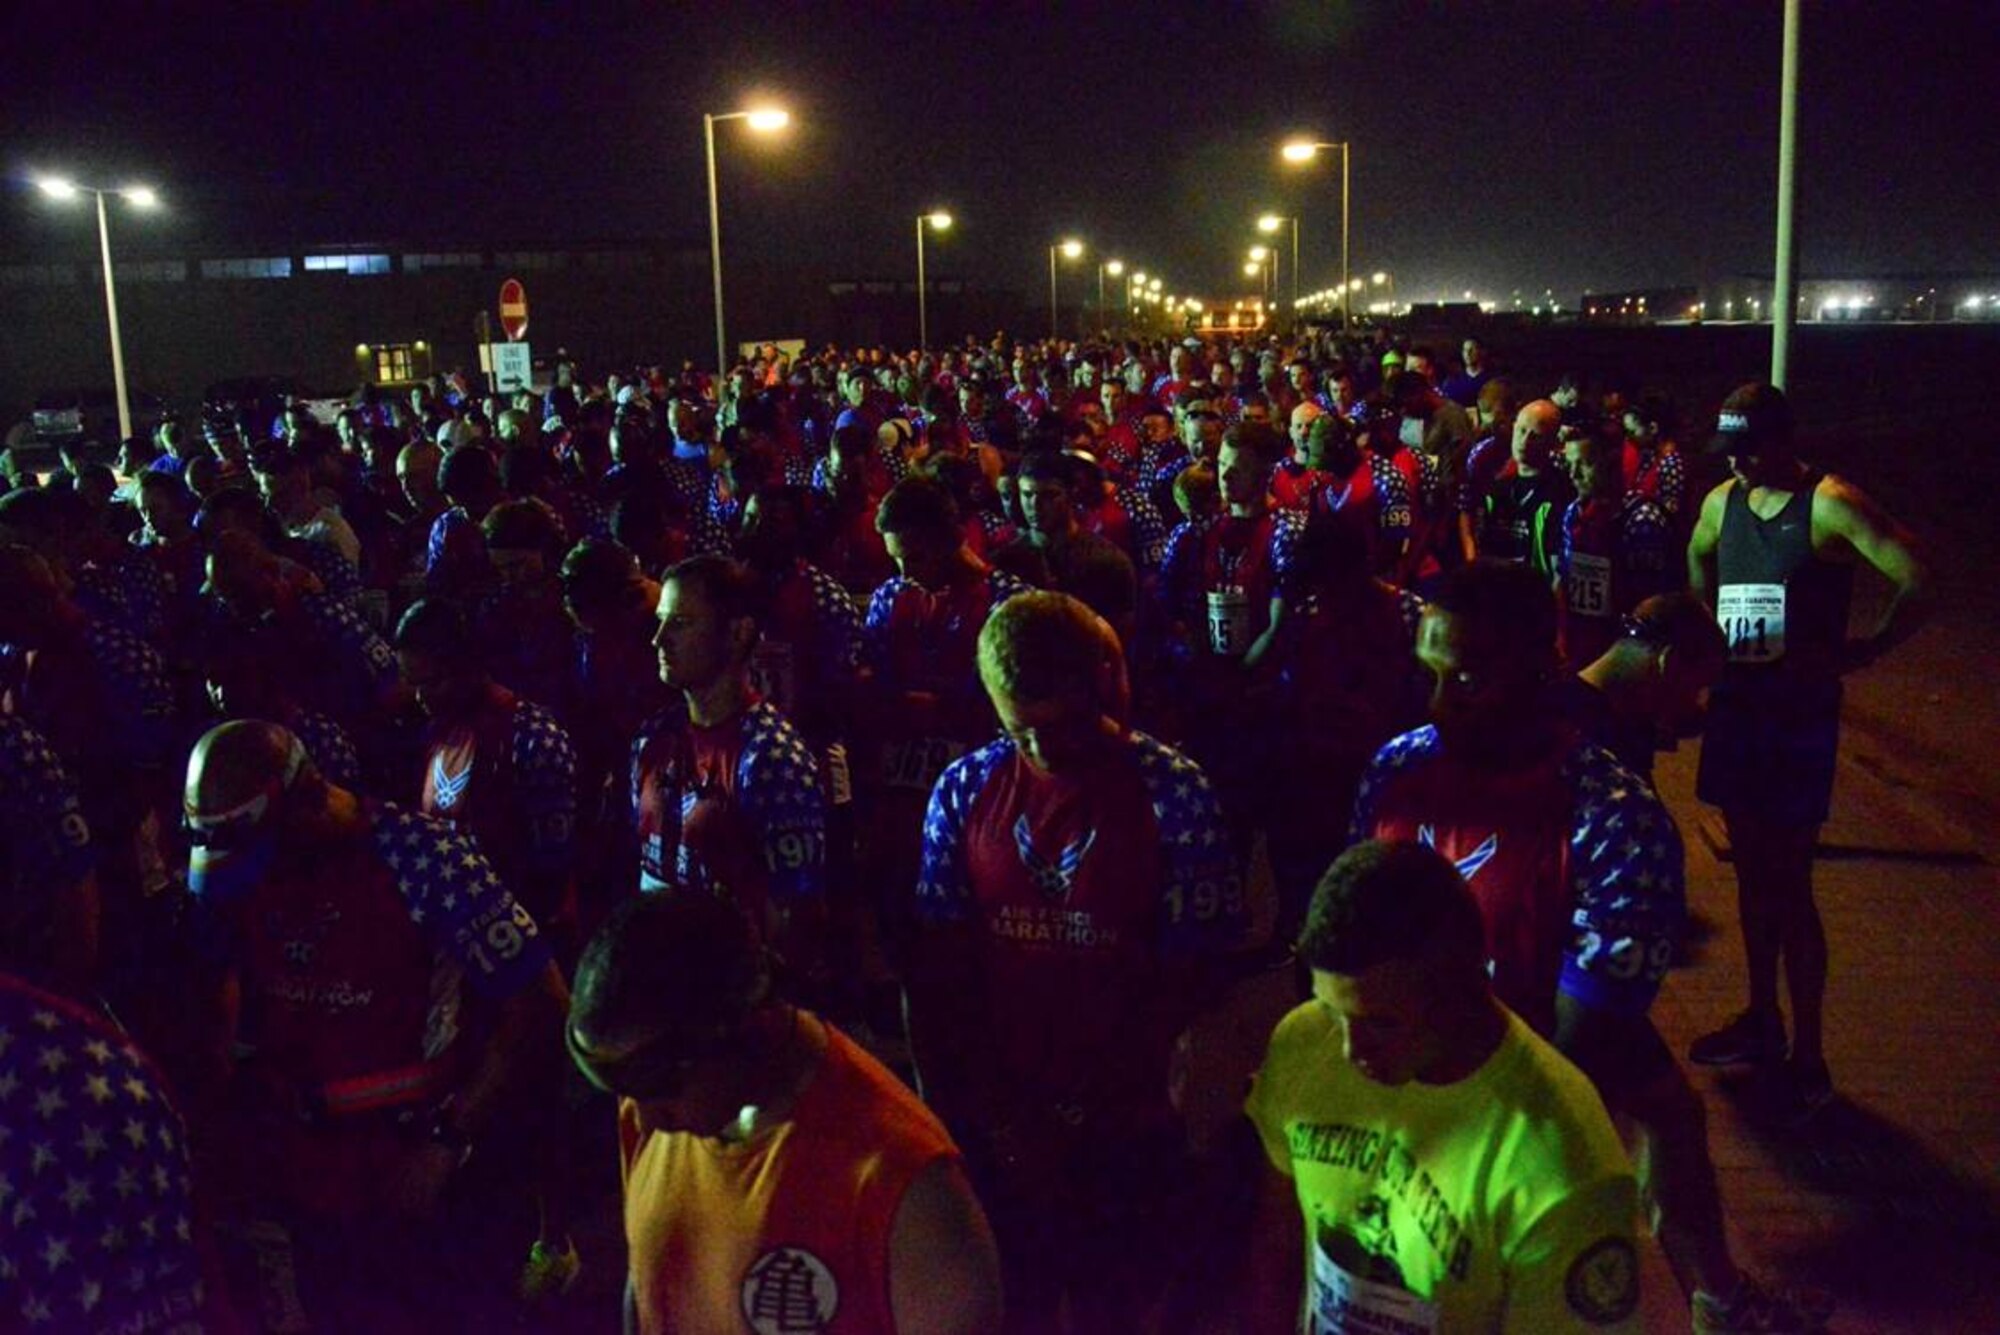 Runners prepare for the start of the 2016 U.S. Air Force Marathon at Al Udeid Air Base in Doha, Qatar. Nearly 2,000 deployed Airmen participate in the marathon annually. (Courtesy photo)